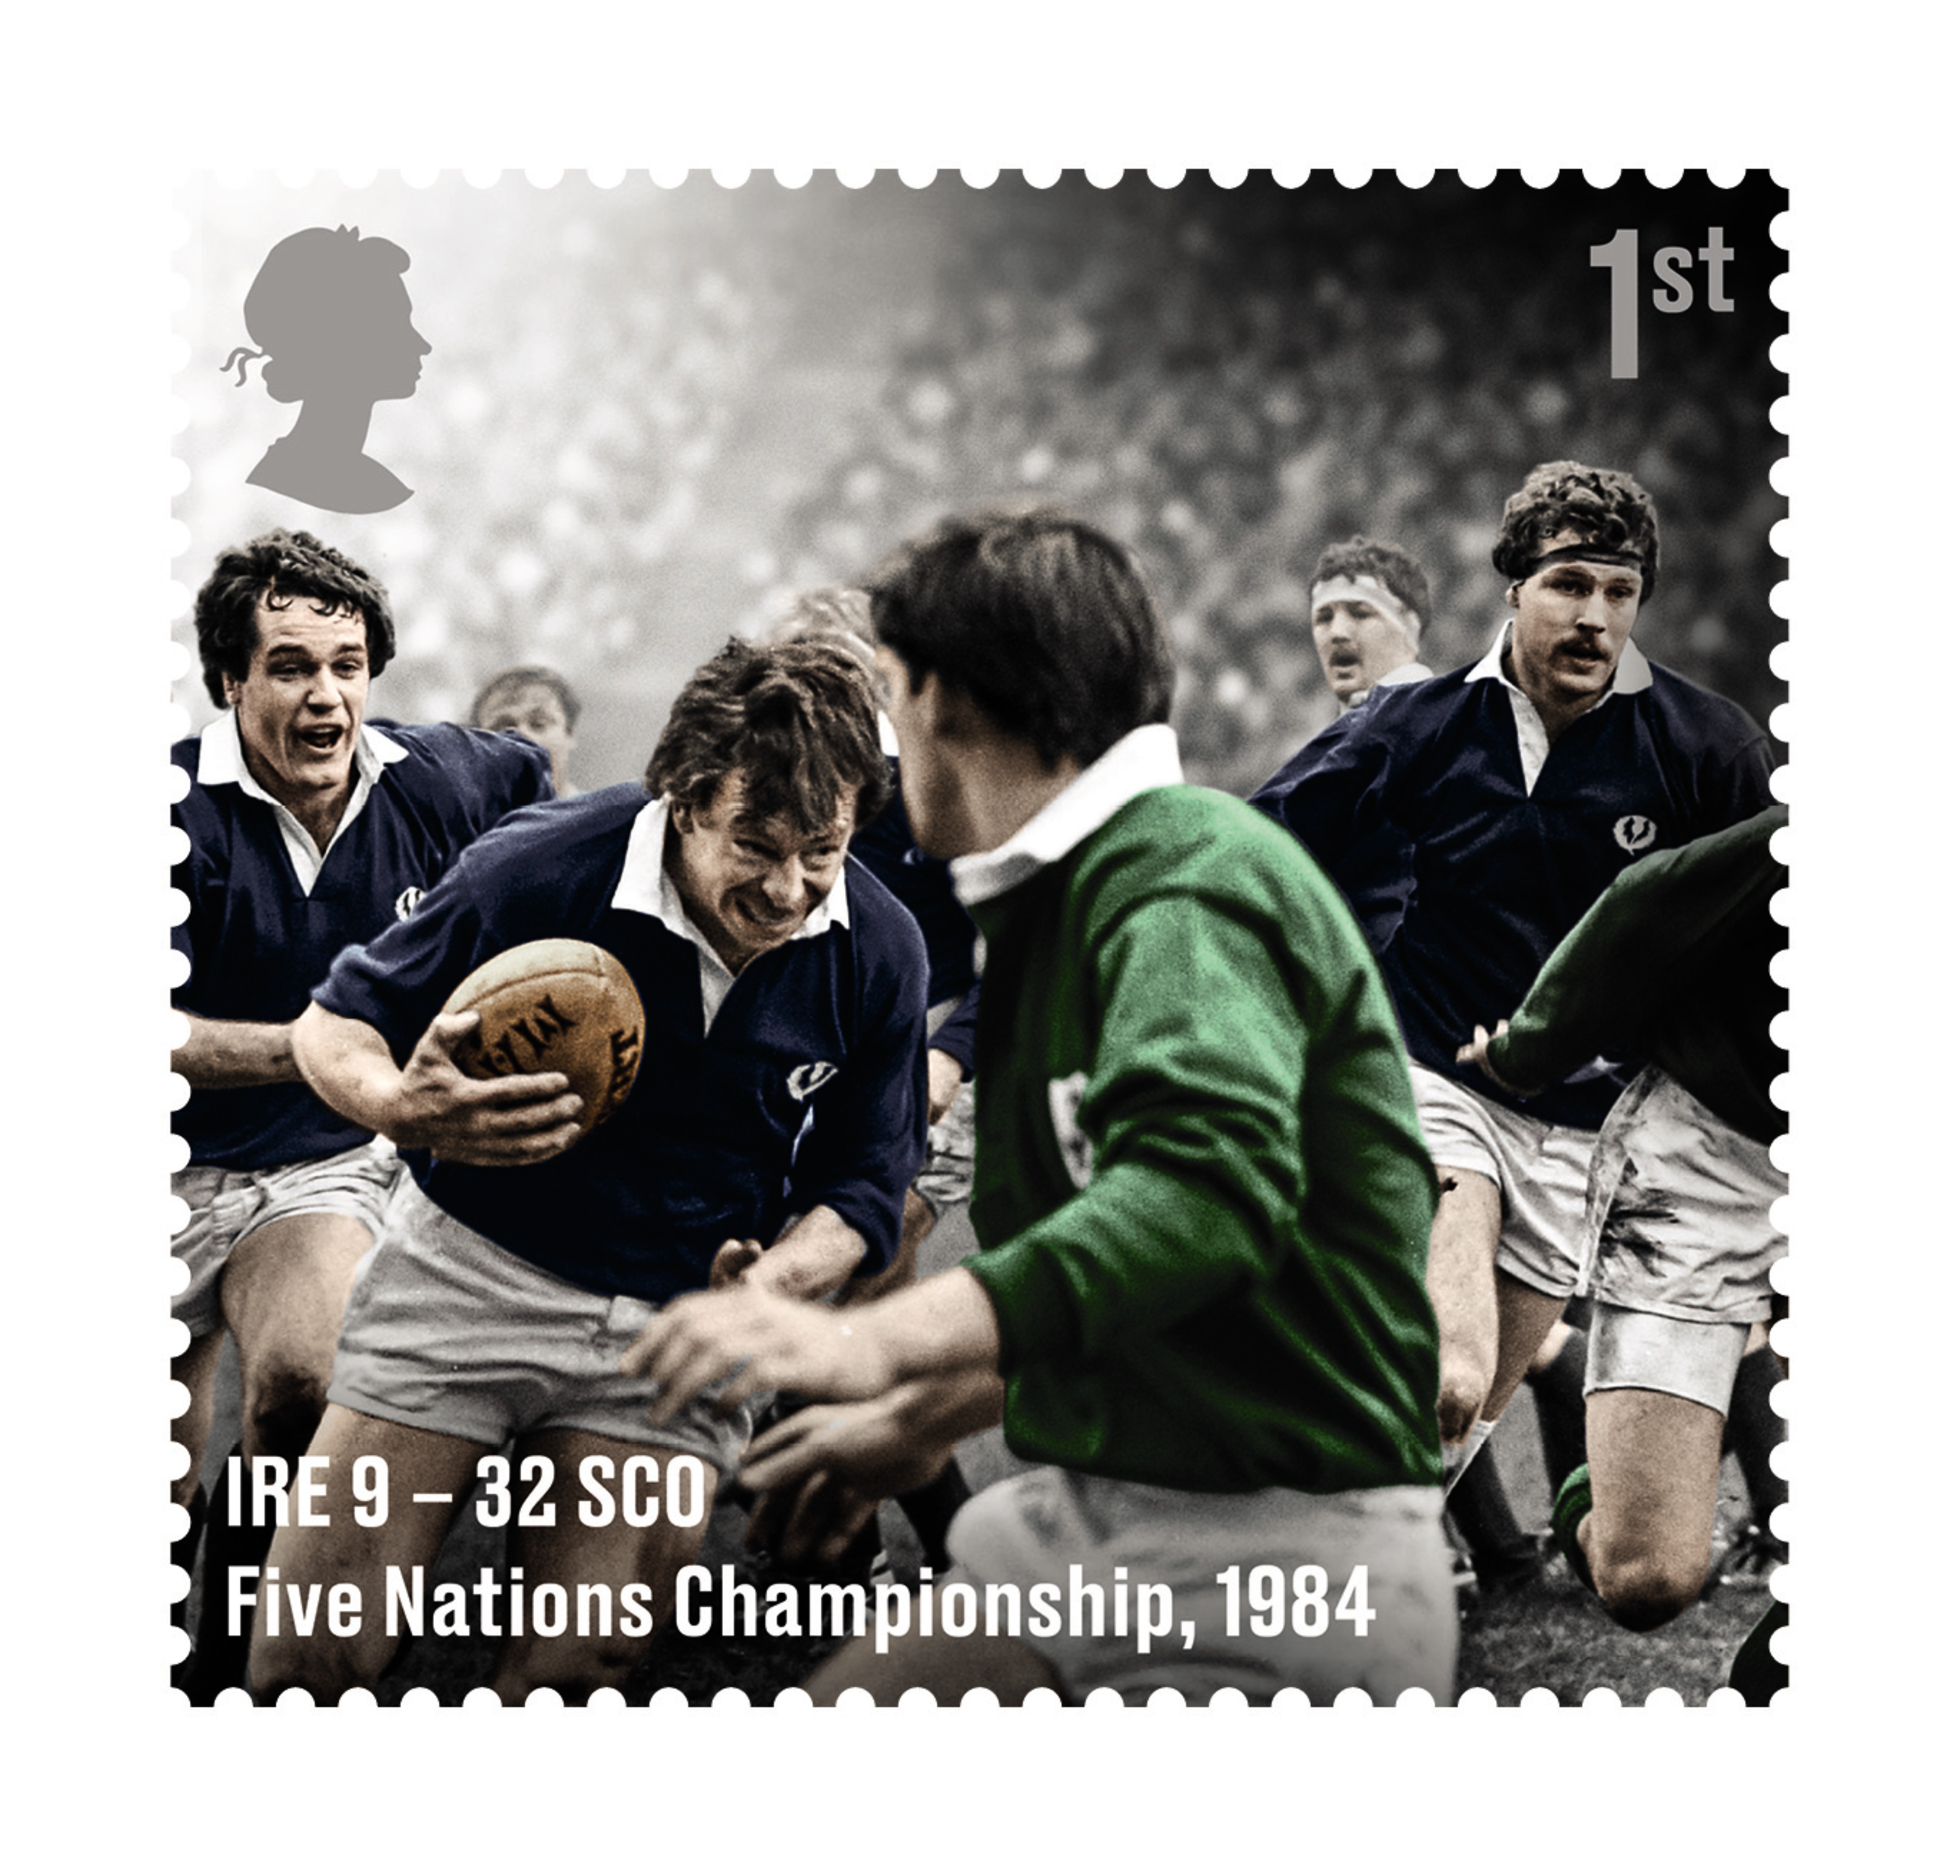 One of the rugby images